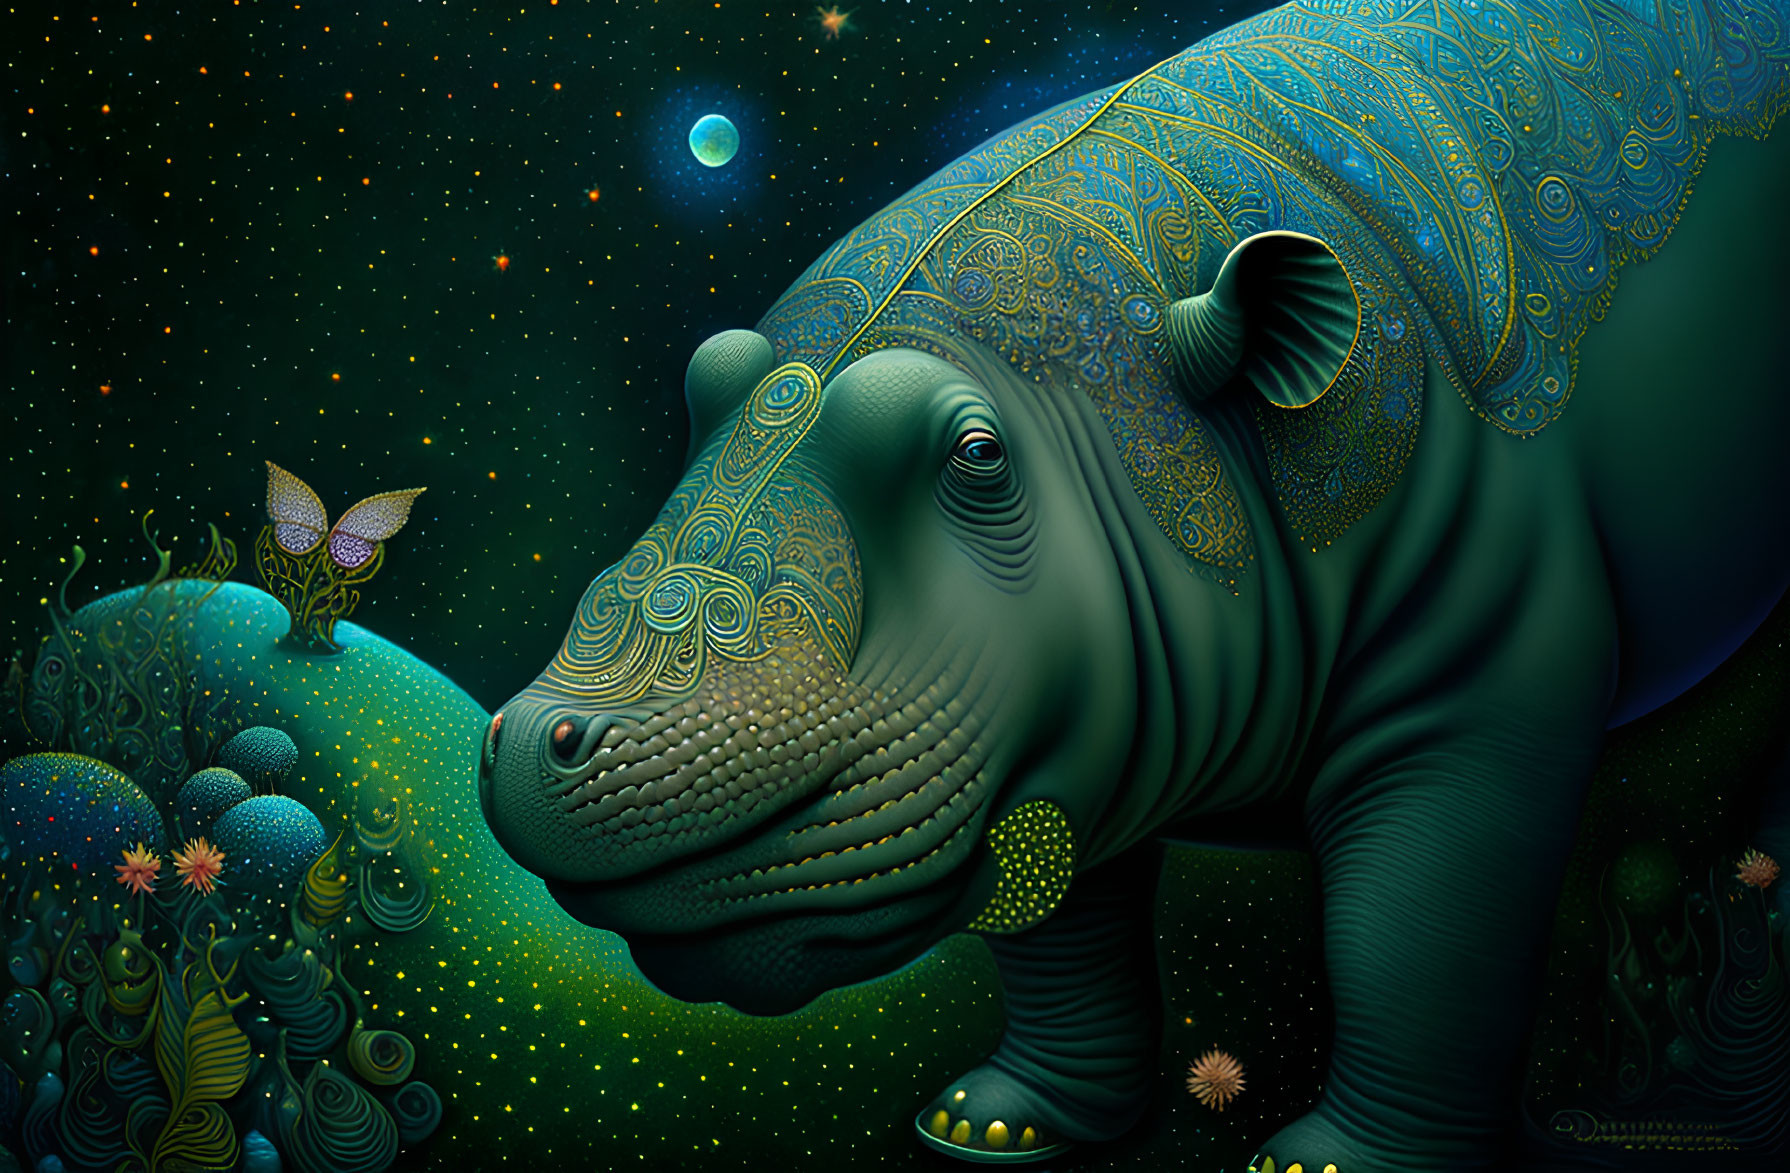 Detailed illustration of a colorful hippopotamus in a starry night setting